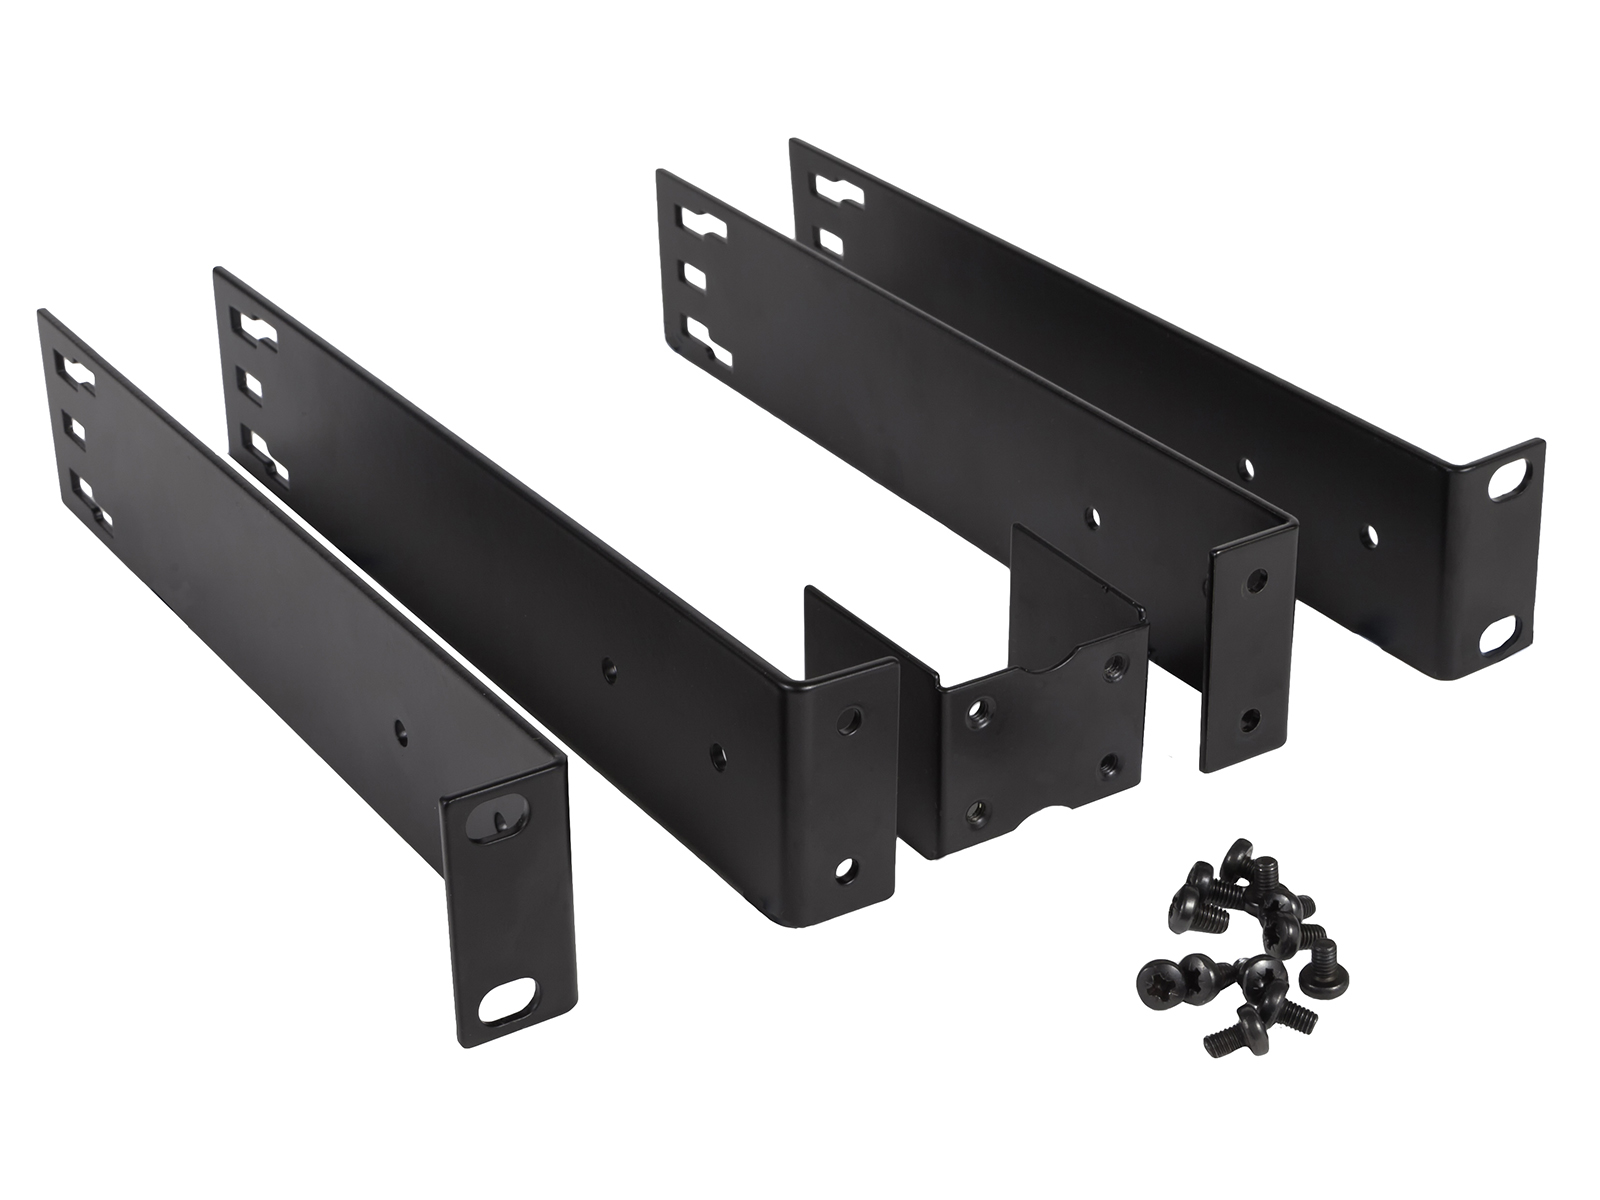 Adder RMK4D-R2 19 inch Rackmount Kit for Two ADDERLink products